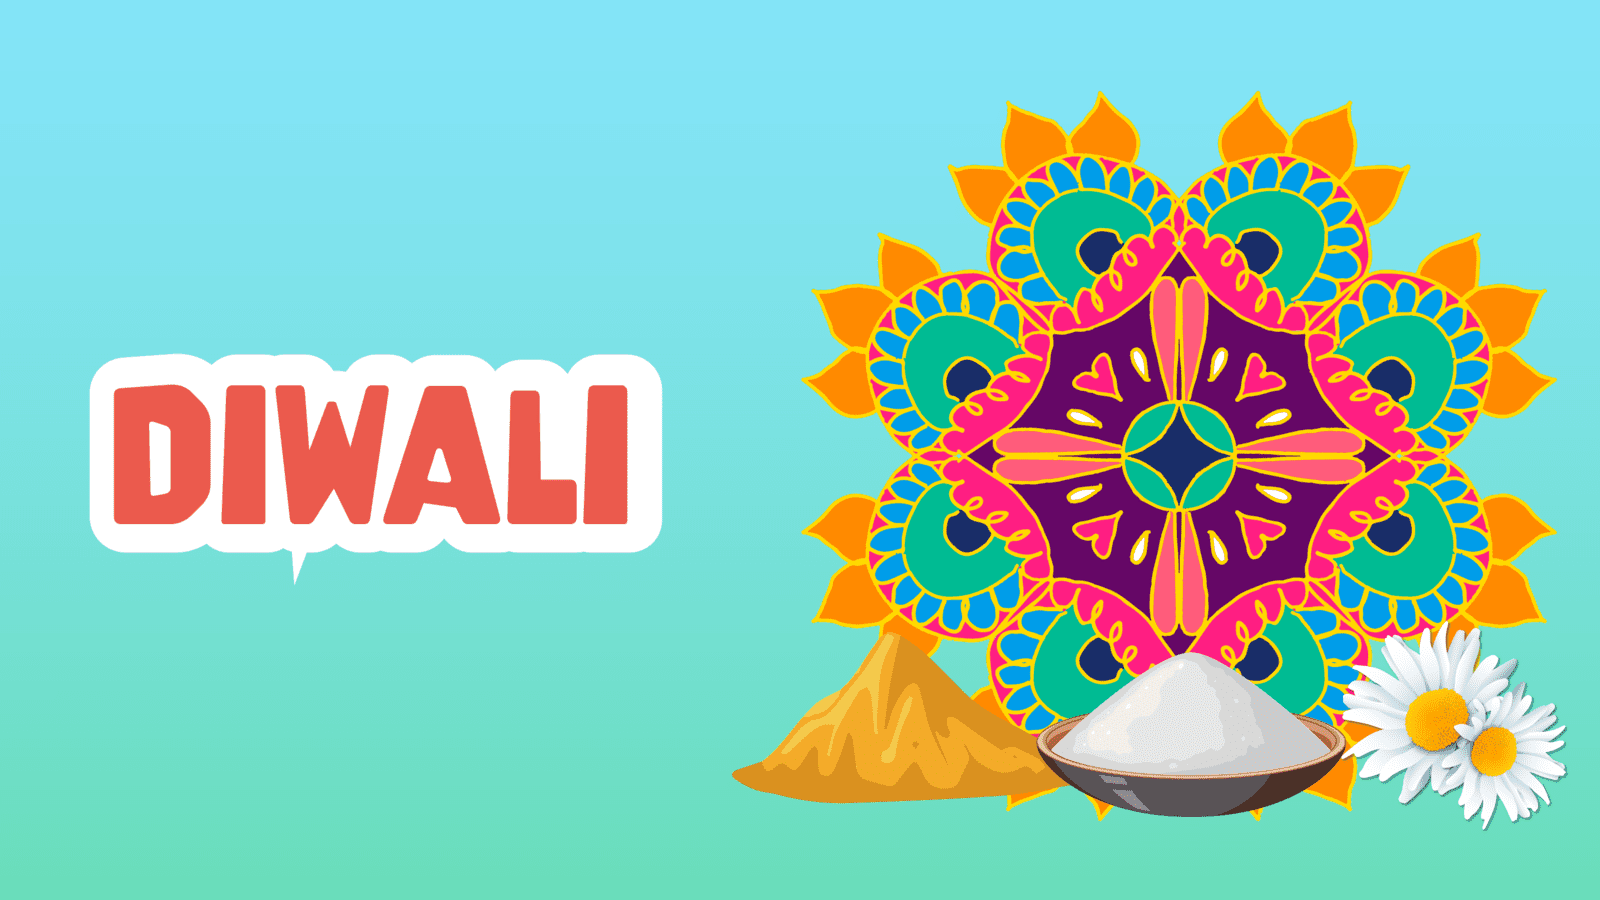 Diwali Facts for Kids – 5 Delightful Facts about Diwali